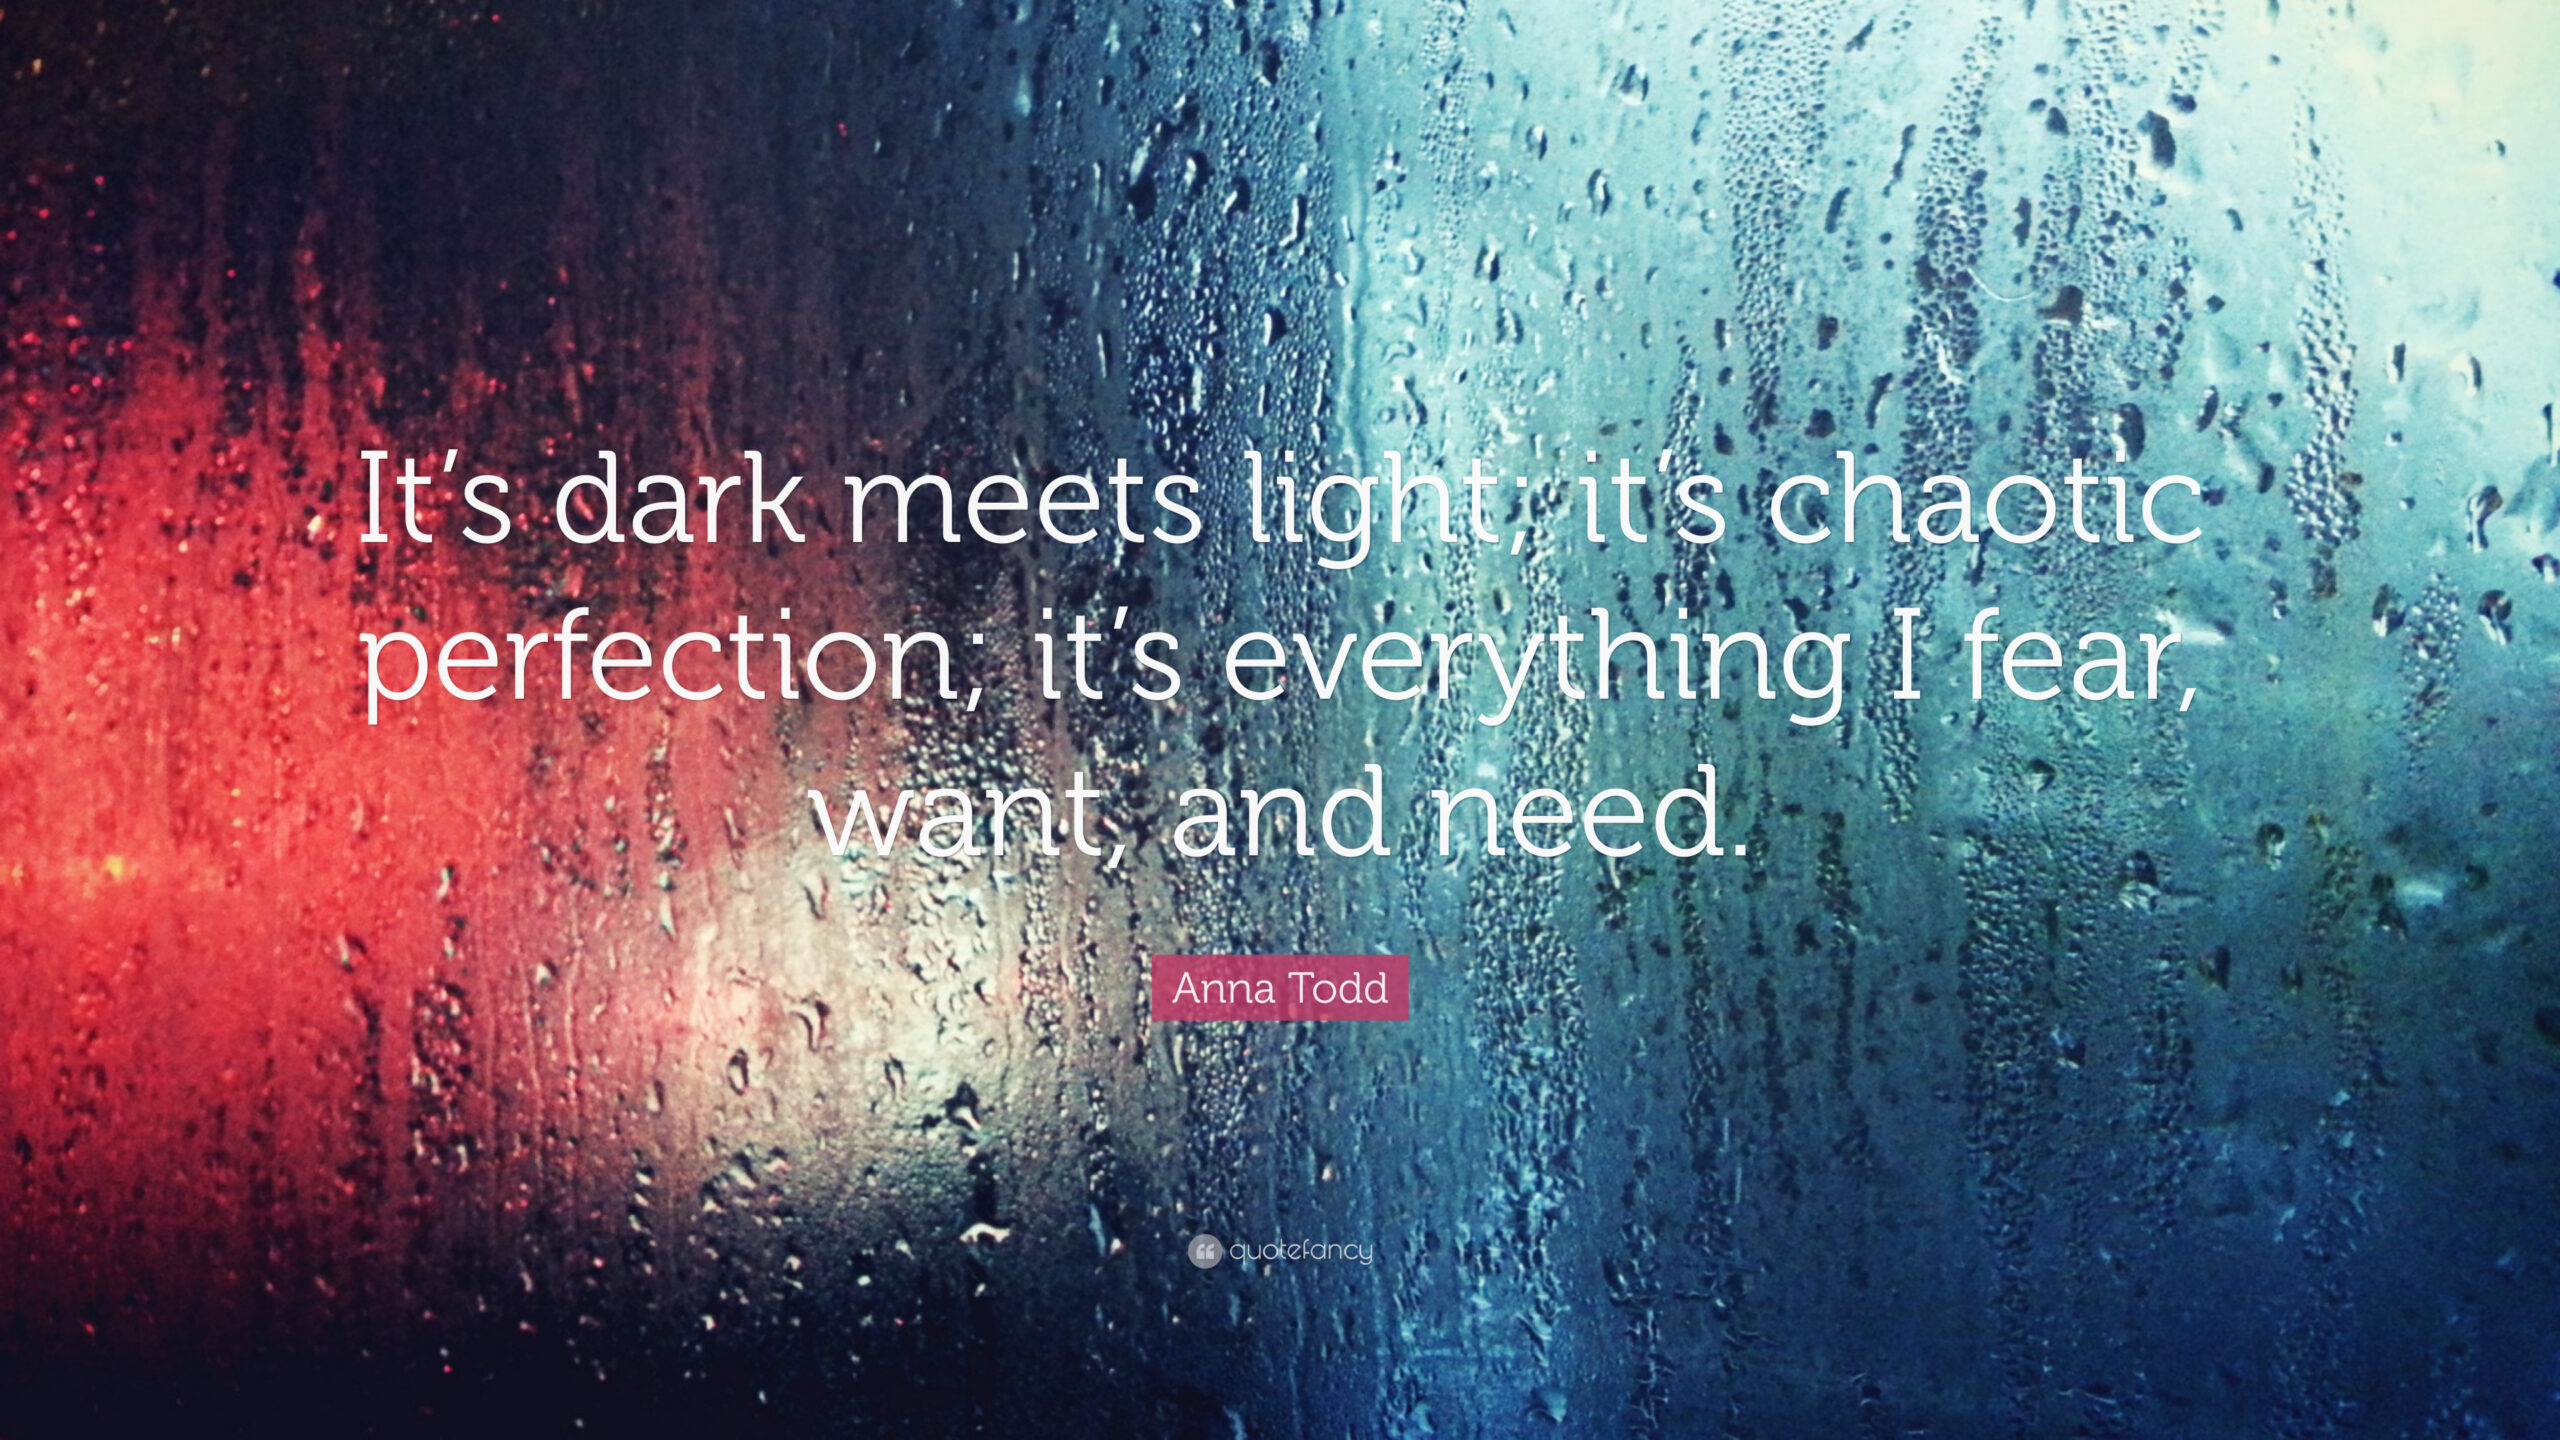 Anna Todd dark meets light chaos lifewithoutapaddle